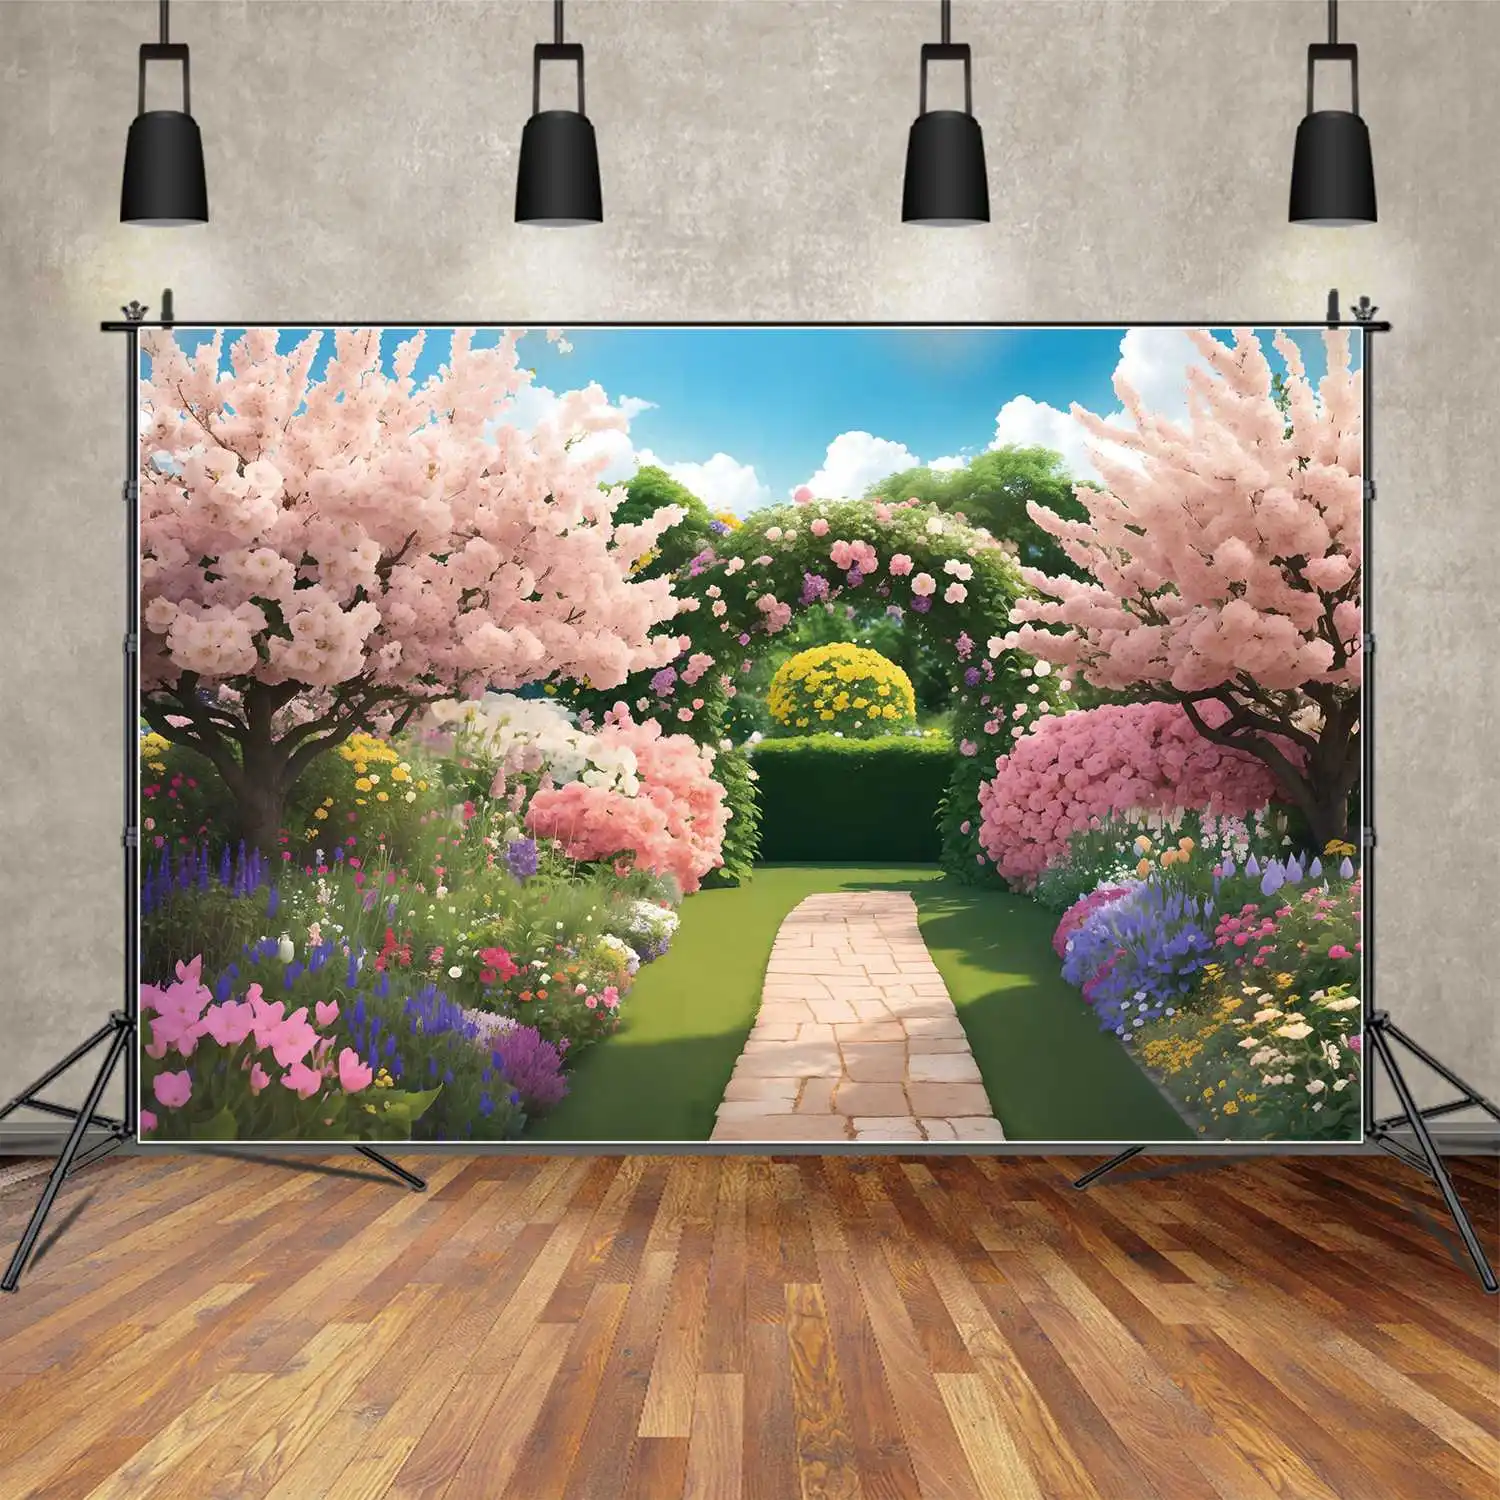 

Green Grass Flowers Party Wall Backdrops Photography Decor Arch Door Custom Children'S Photo Booth Photographic Backgrounds